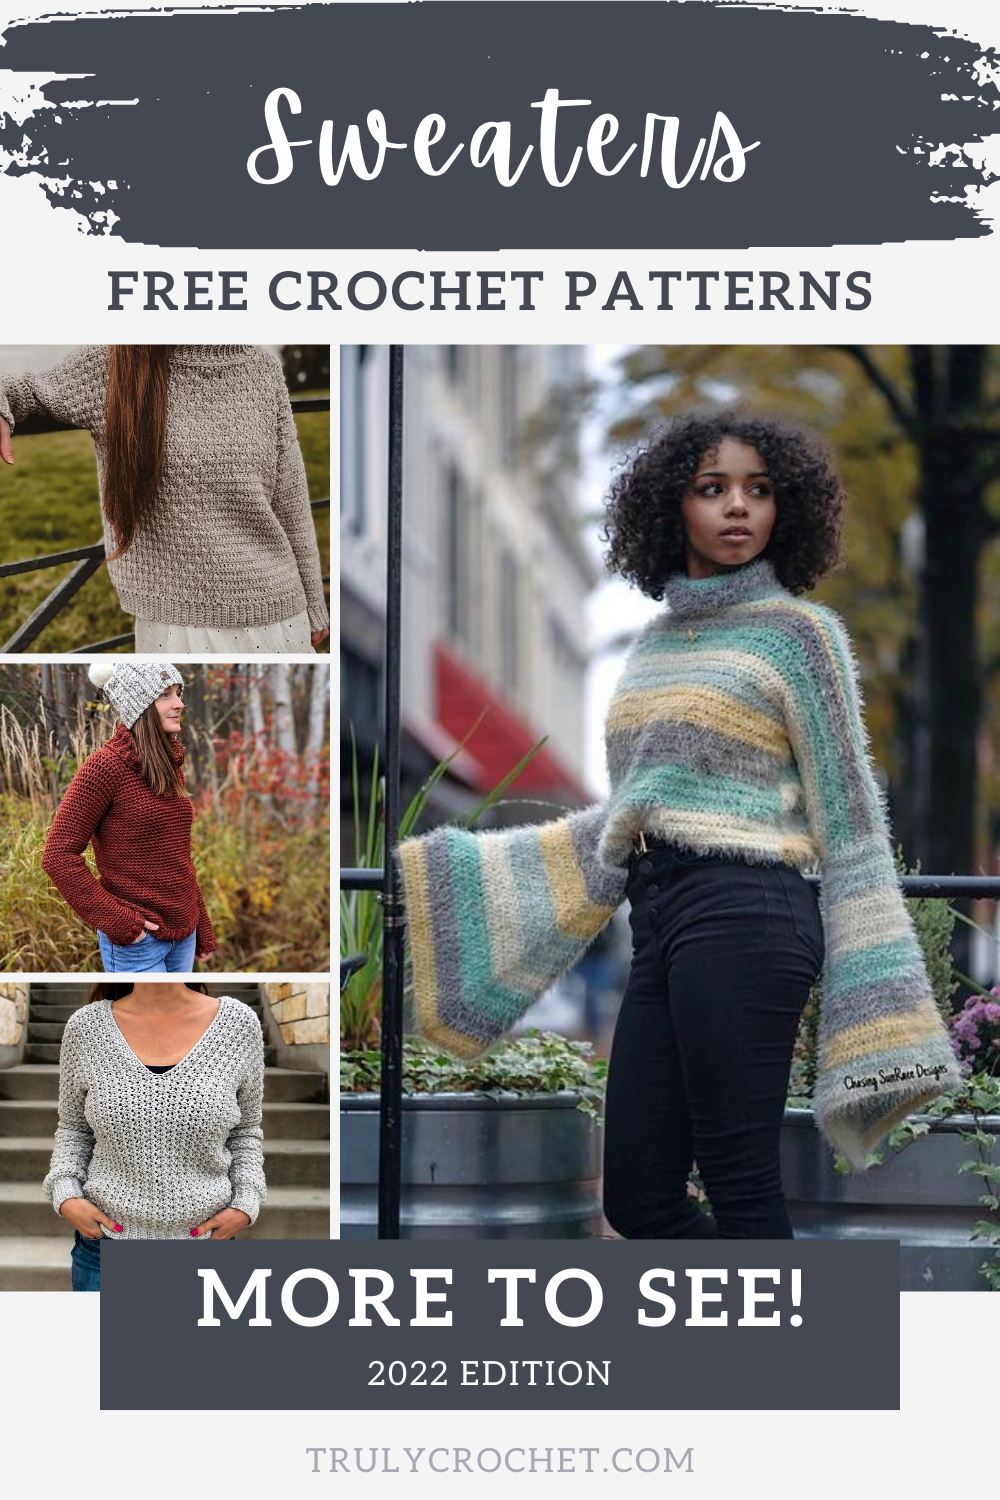 DIY CROCHET SWEATER  how to crochet an oversized pullover sweater